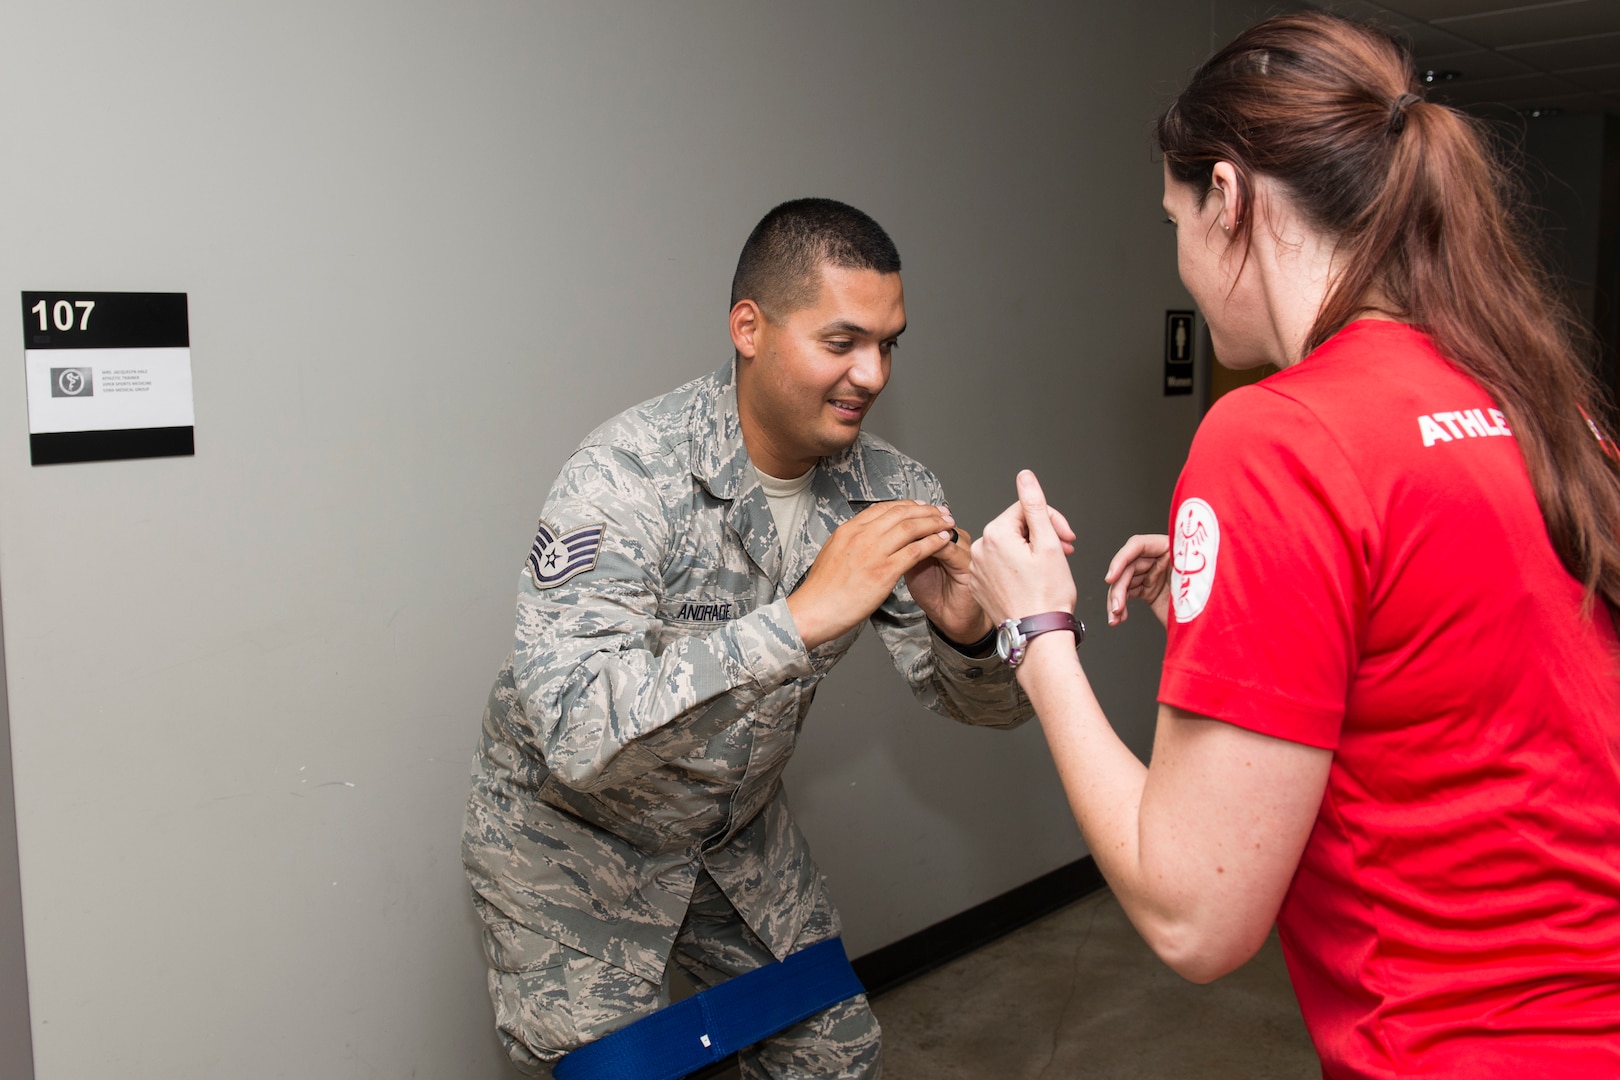 Jacquelyn Hale, a 343rd Training Squadron athletic trainer, walks a 343rd TRS instructor through physical training exercises